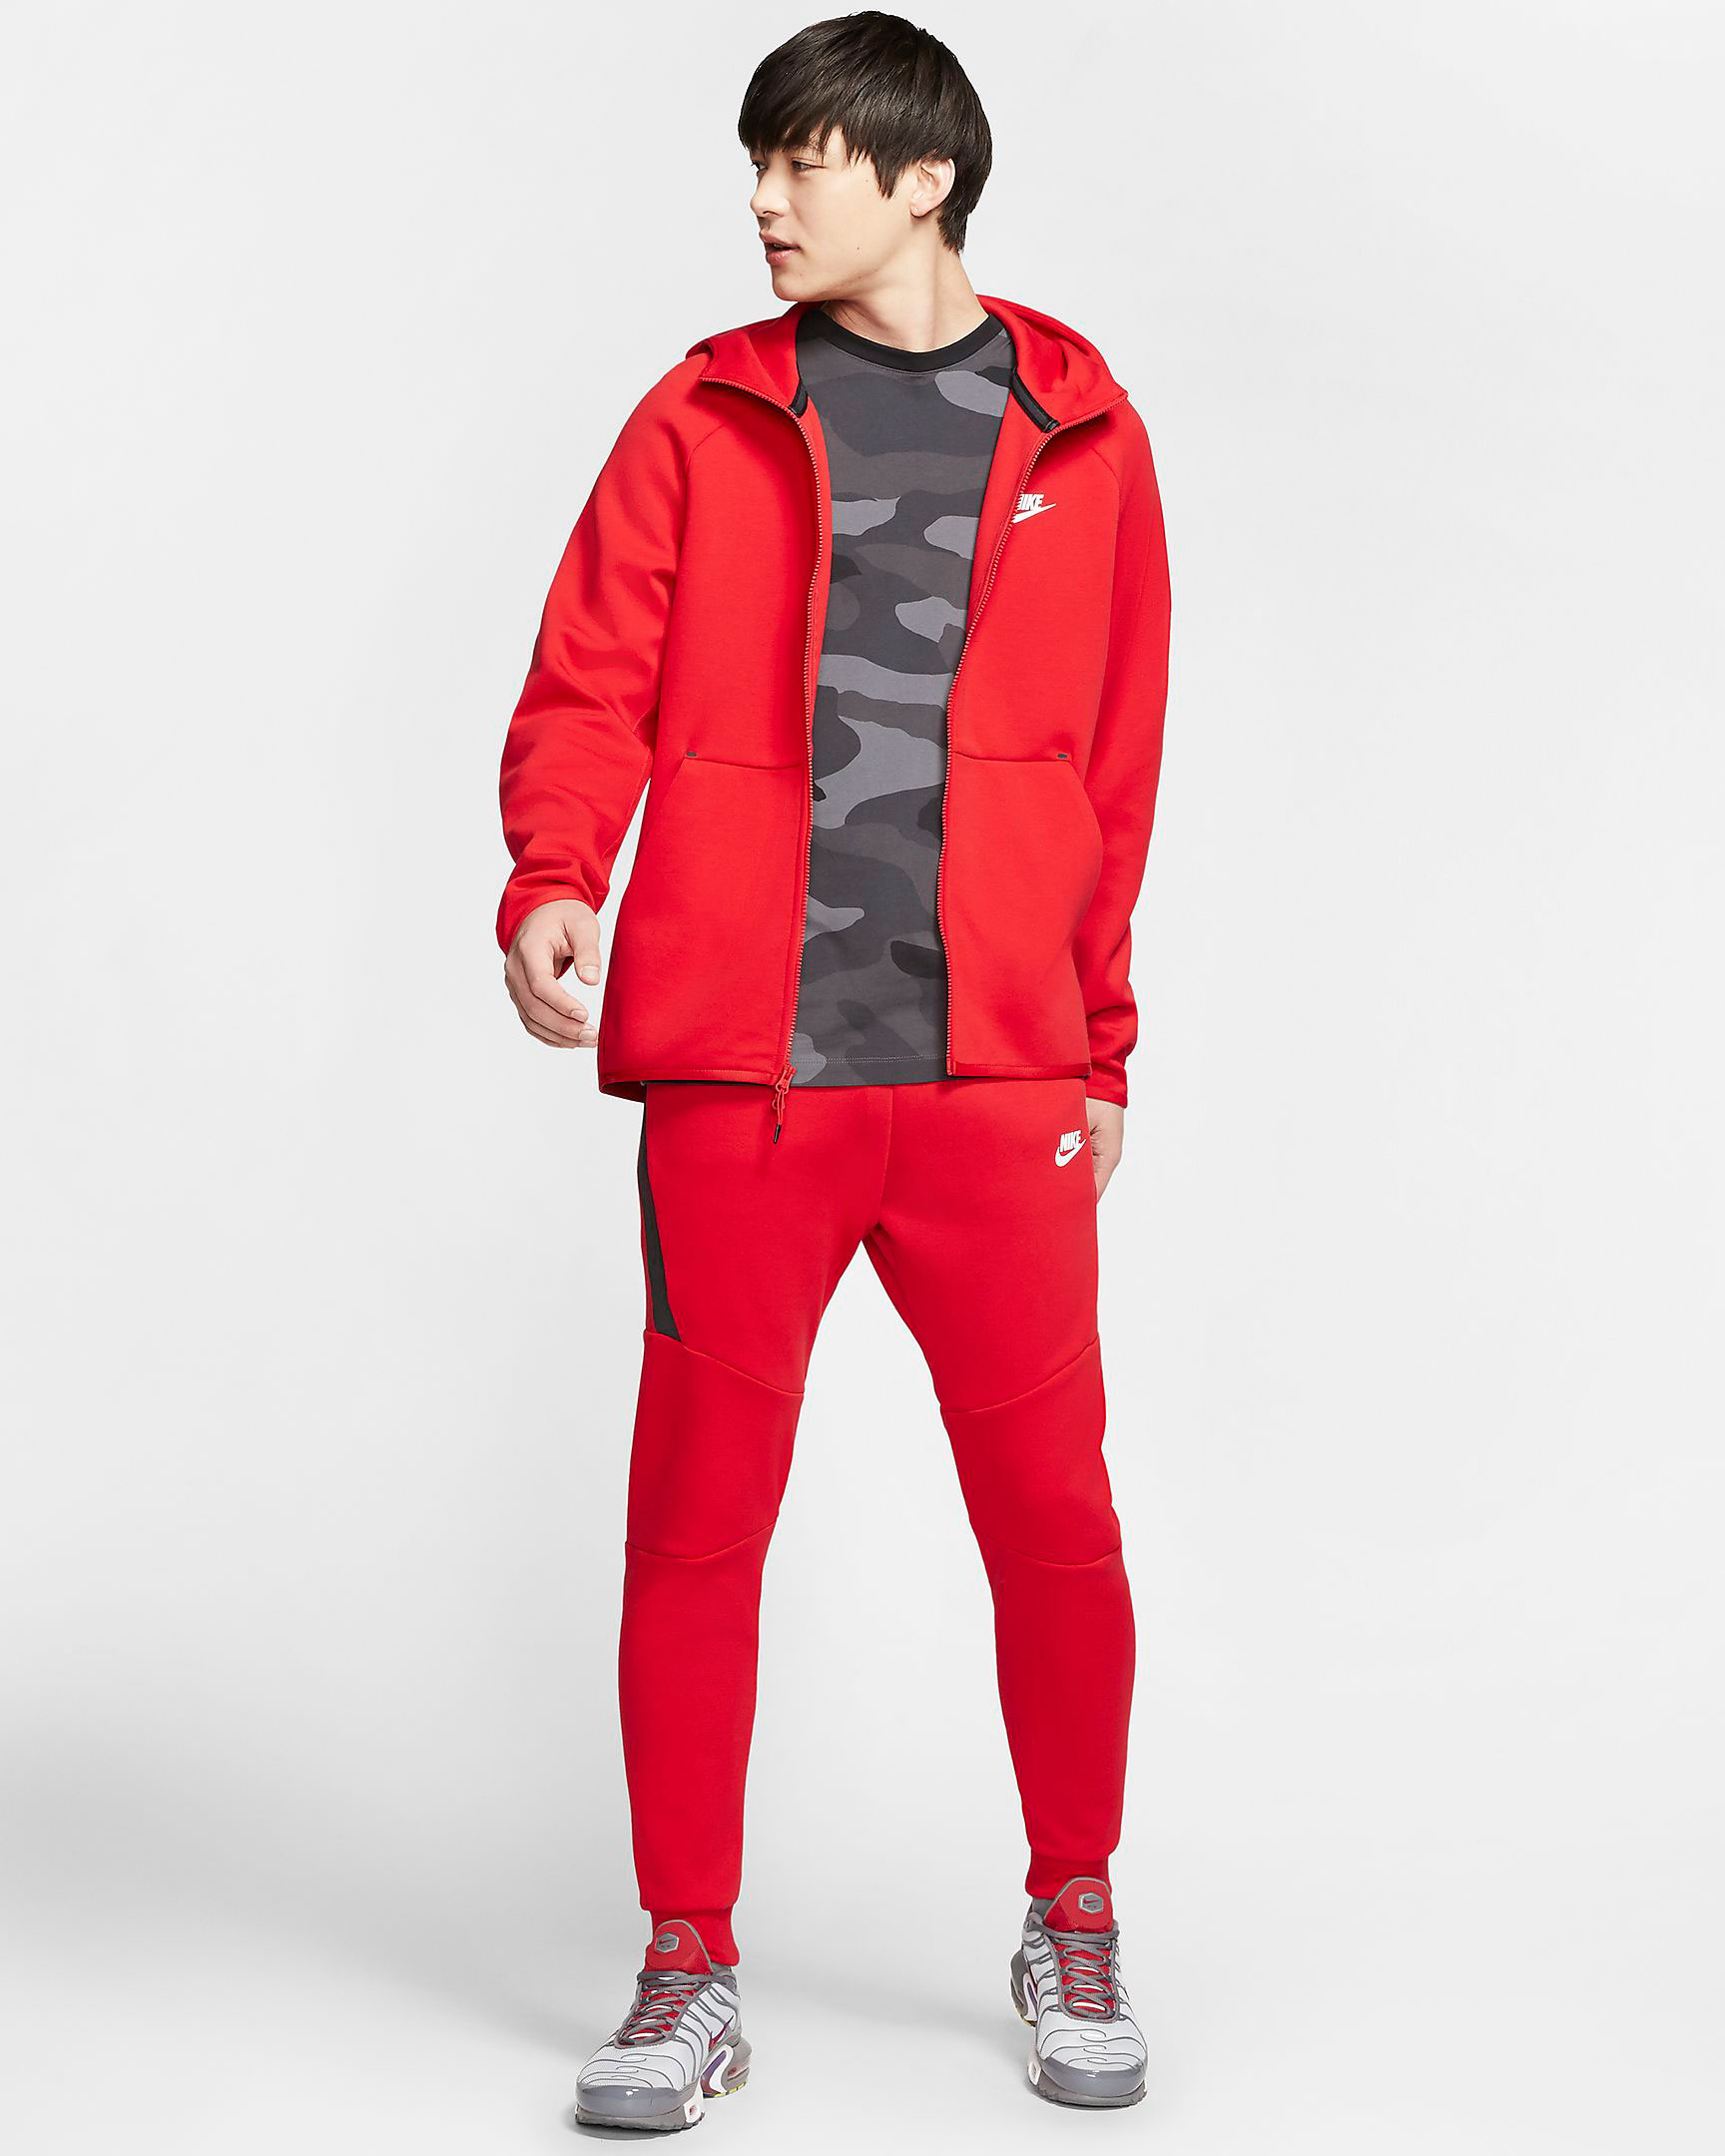 nike outfits red